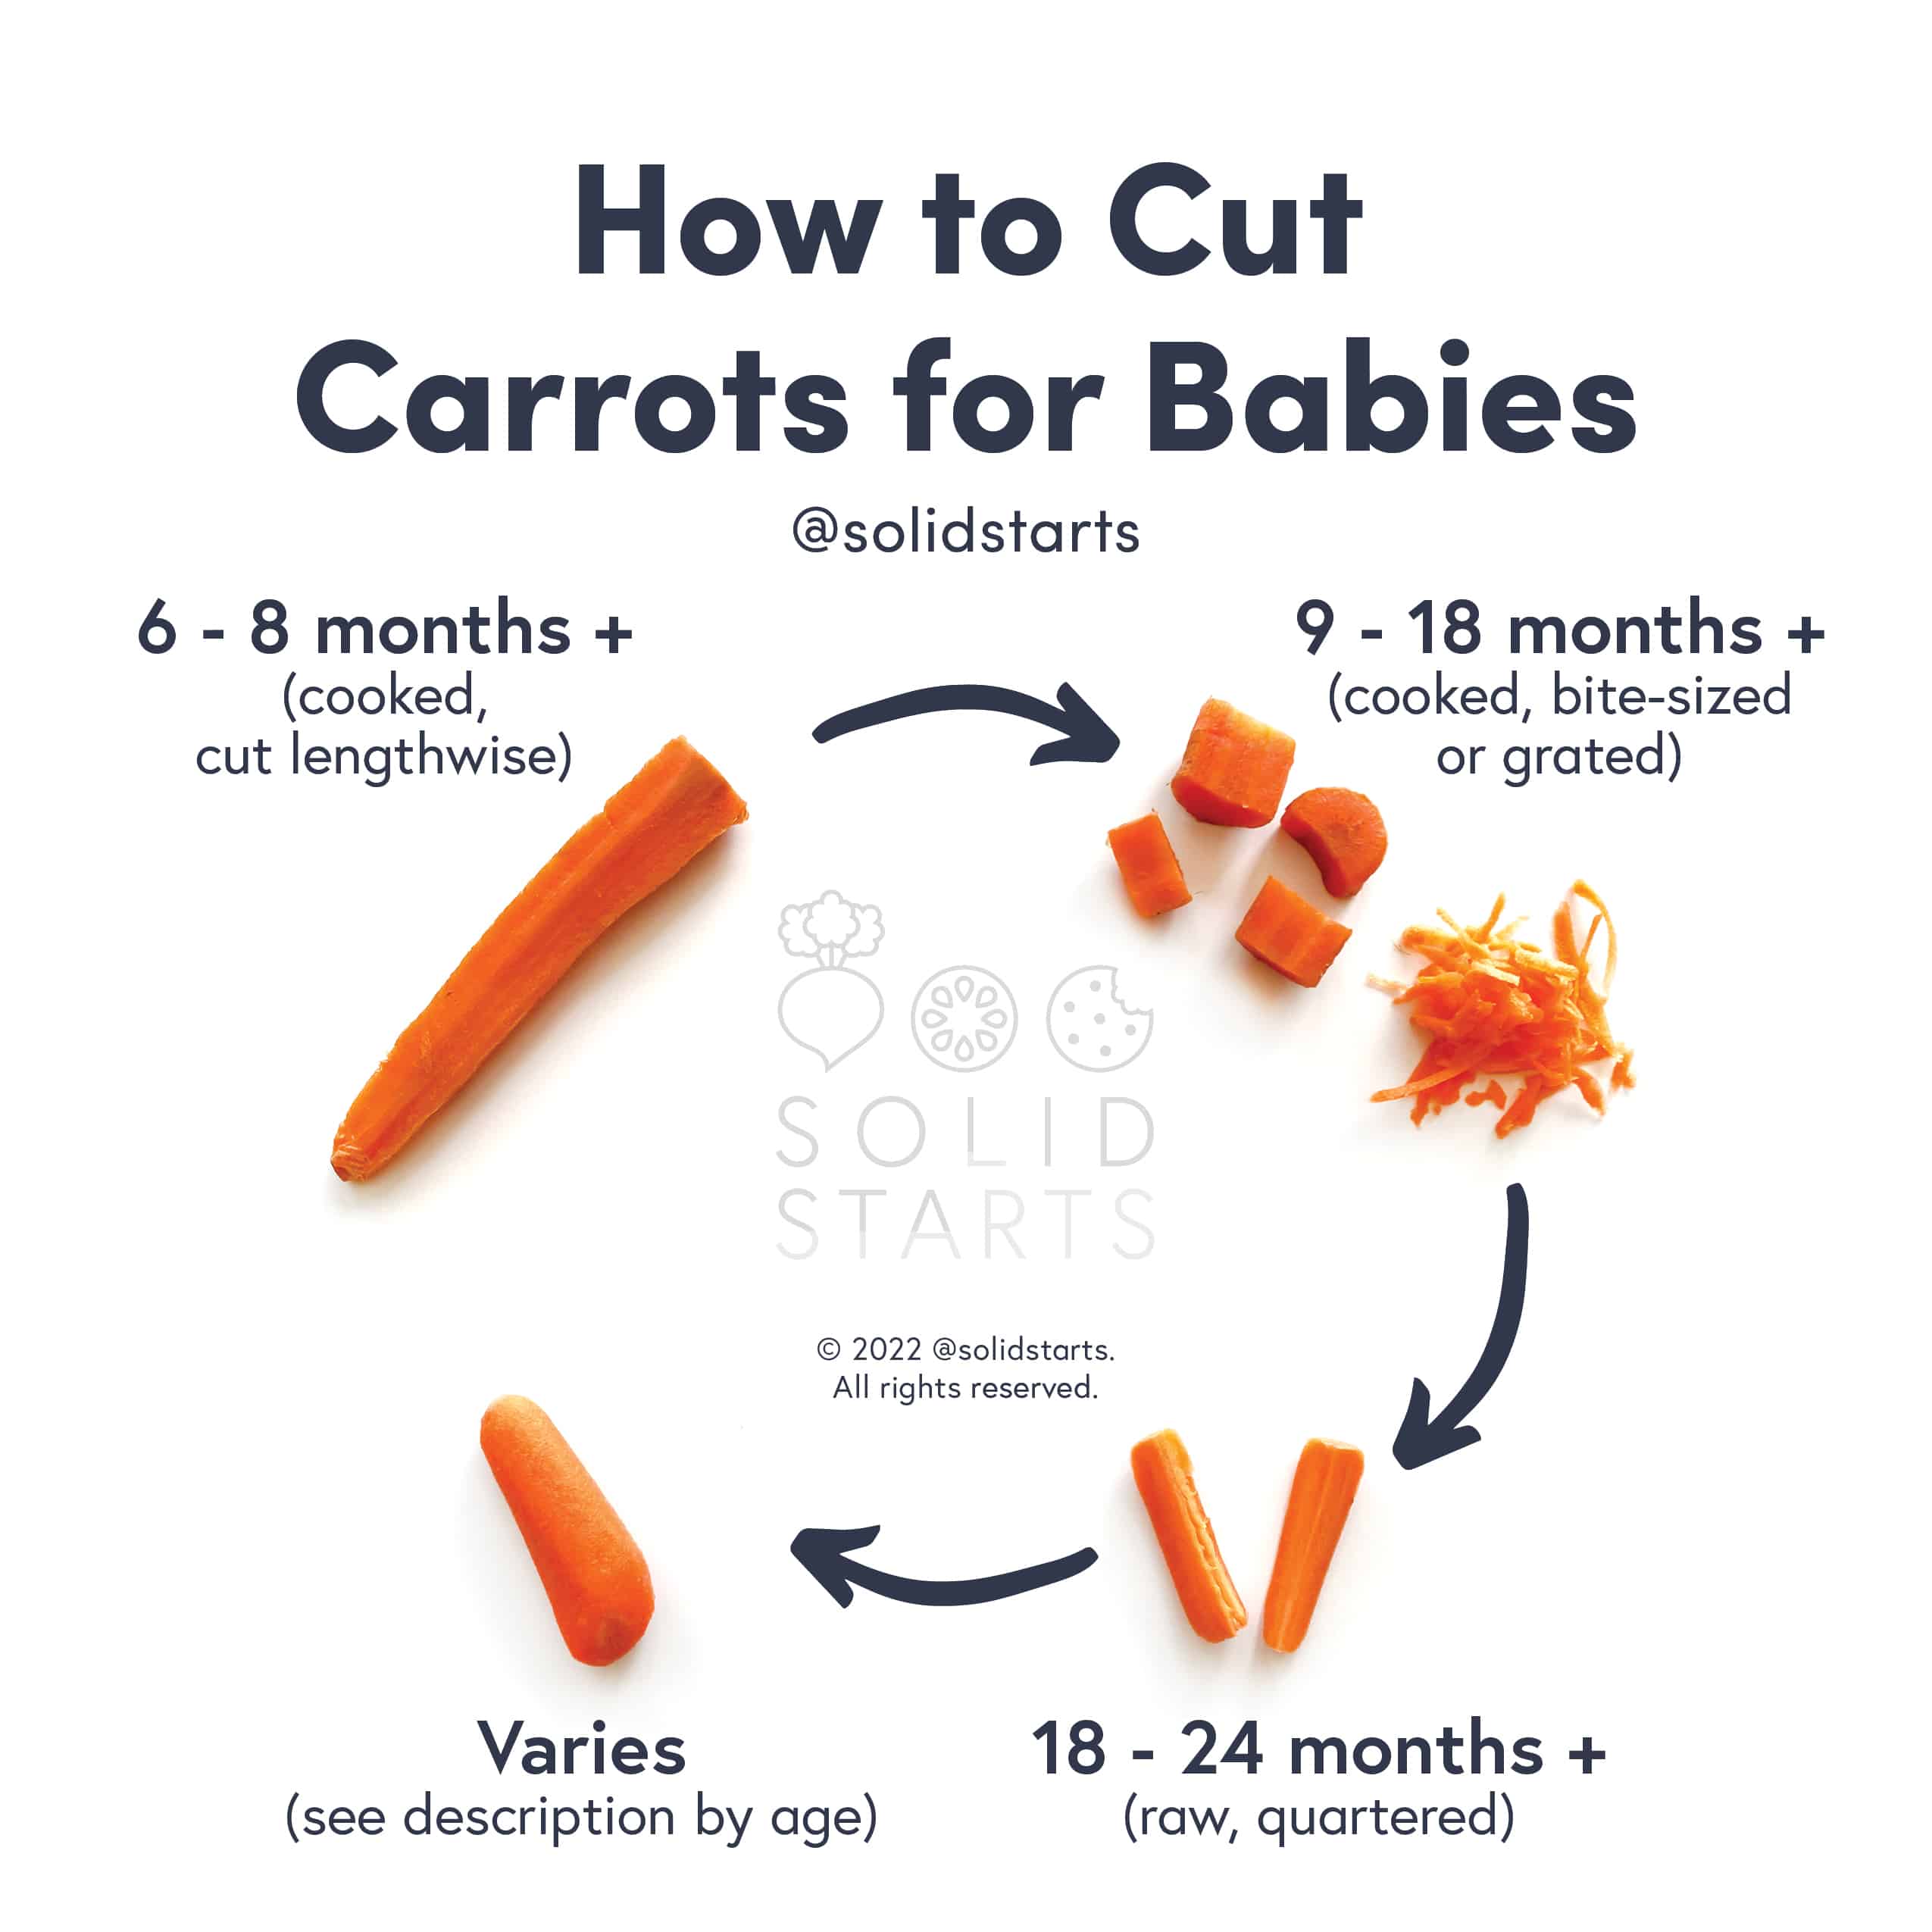 How to Cut Carrots for Babies